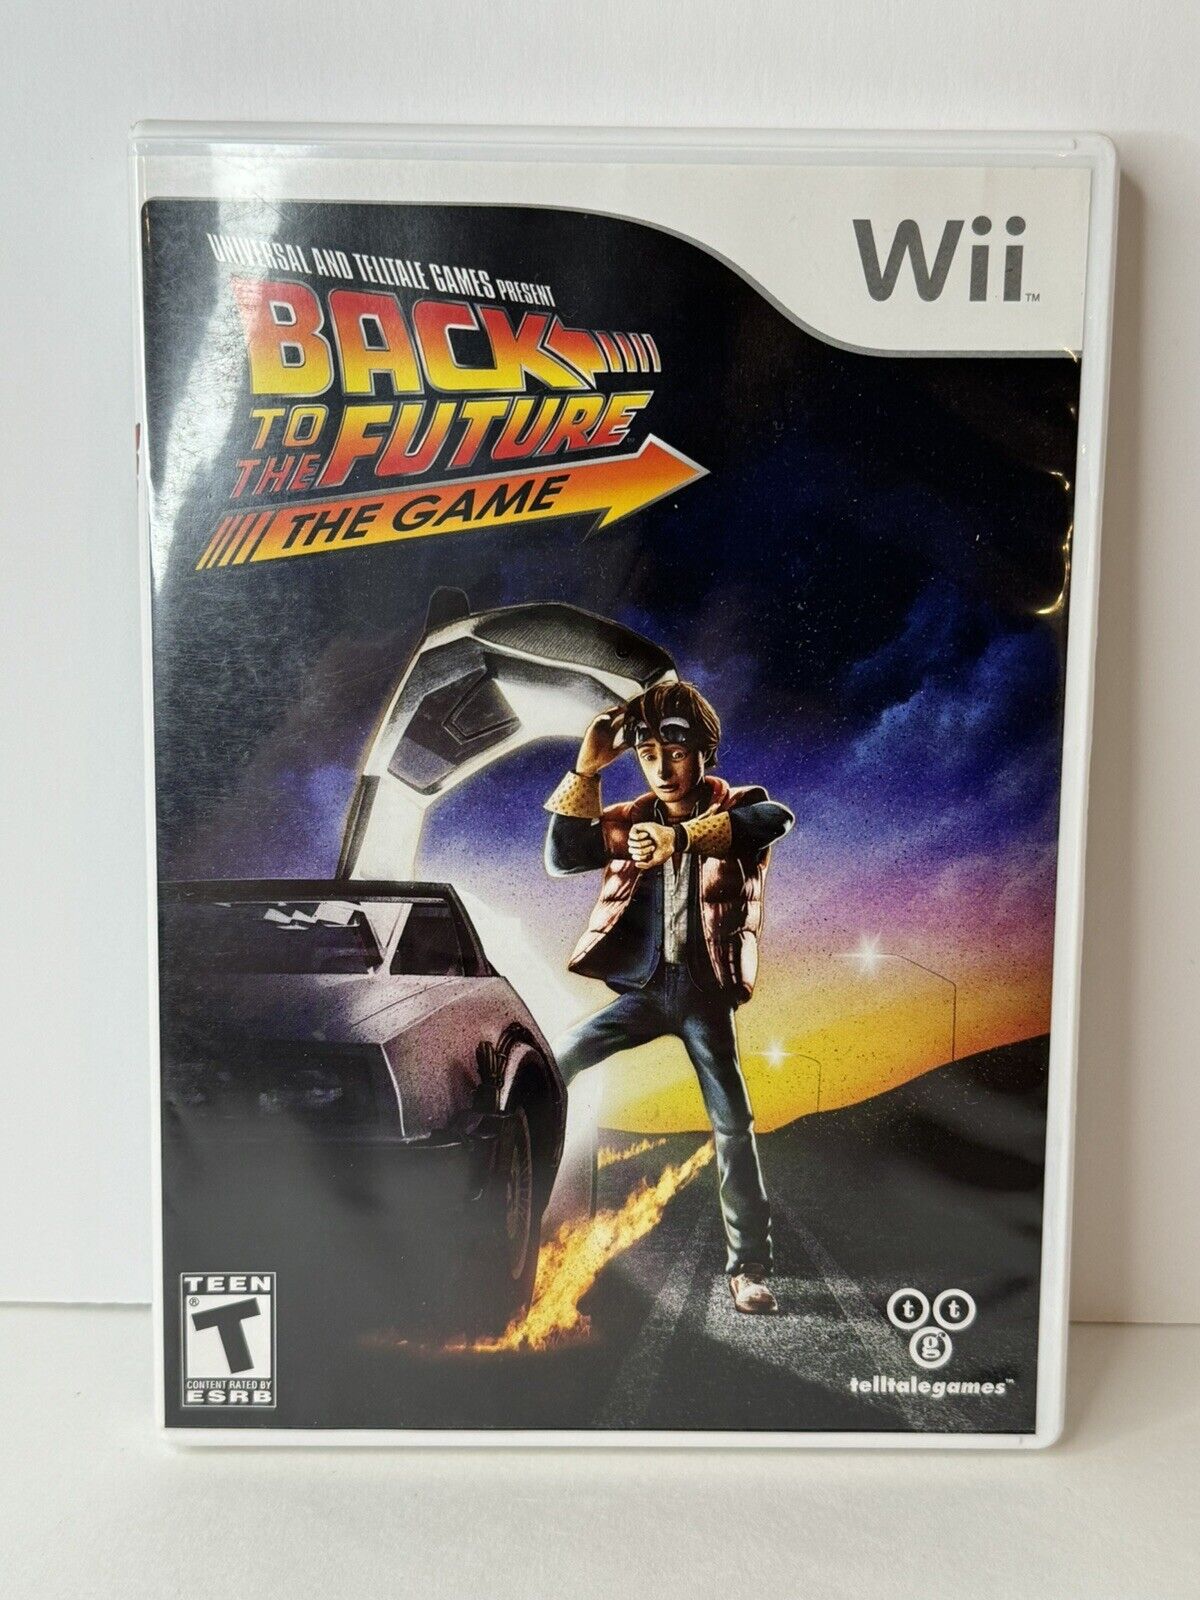 Back To The Future The Game Wii Game Case And Manual Tested Complete